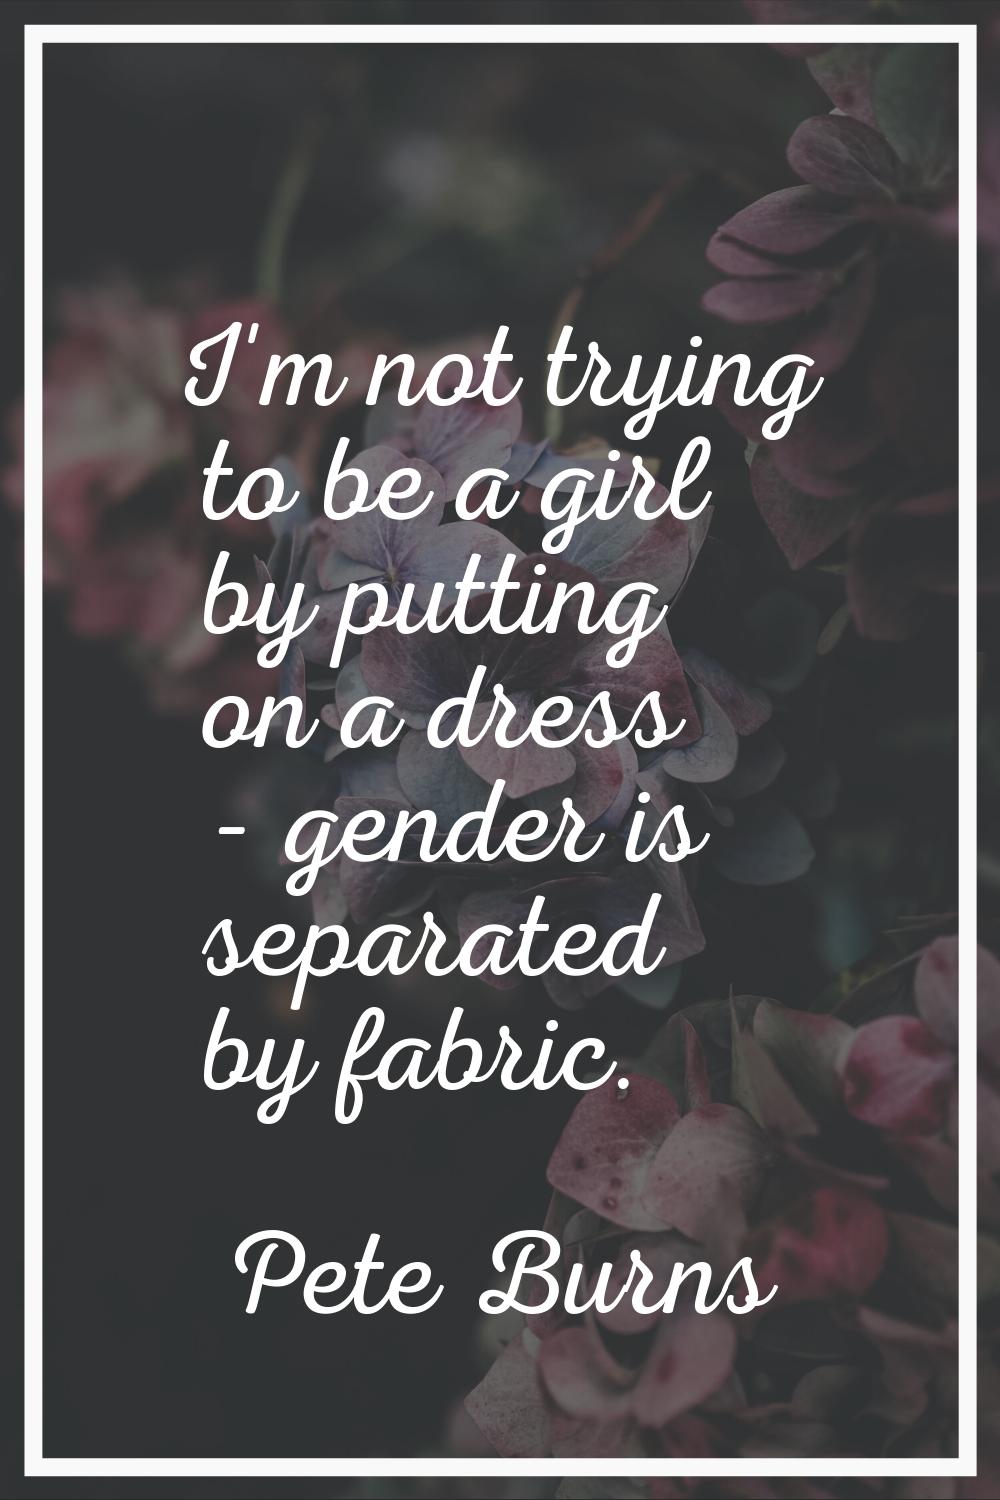 I'm not trying to be a girl by putting on a dress - gender is separated by fabric.